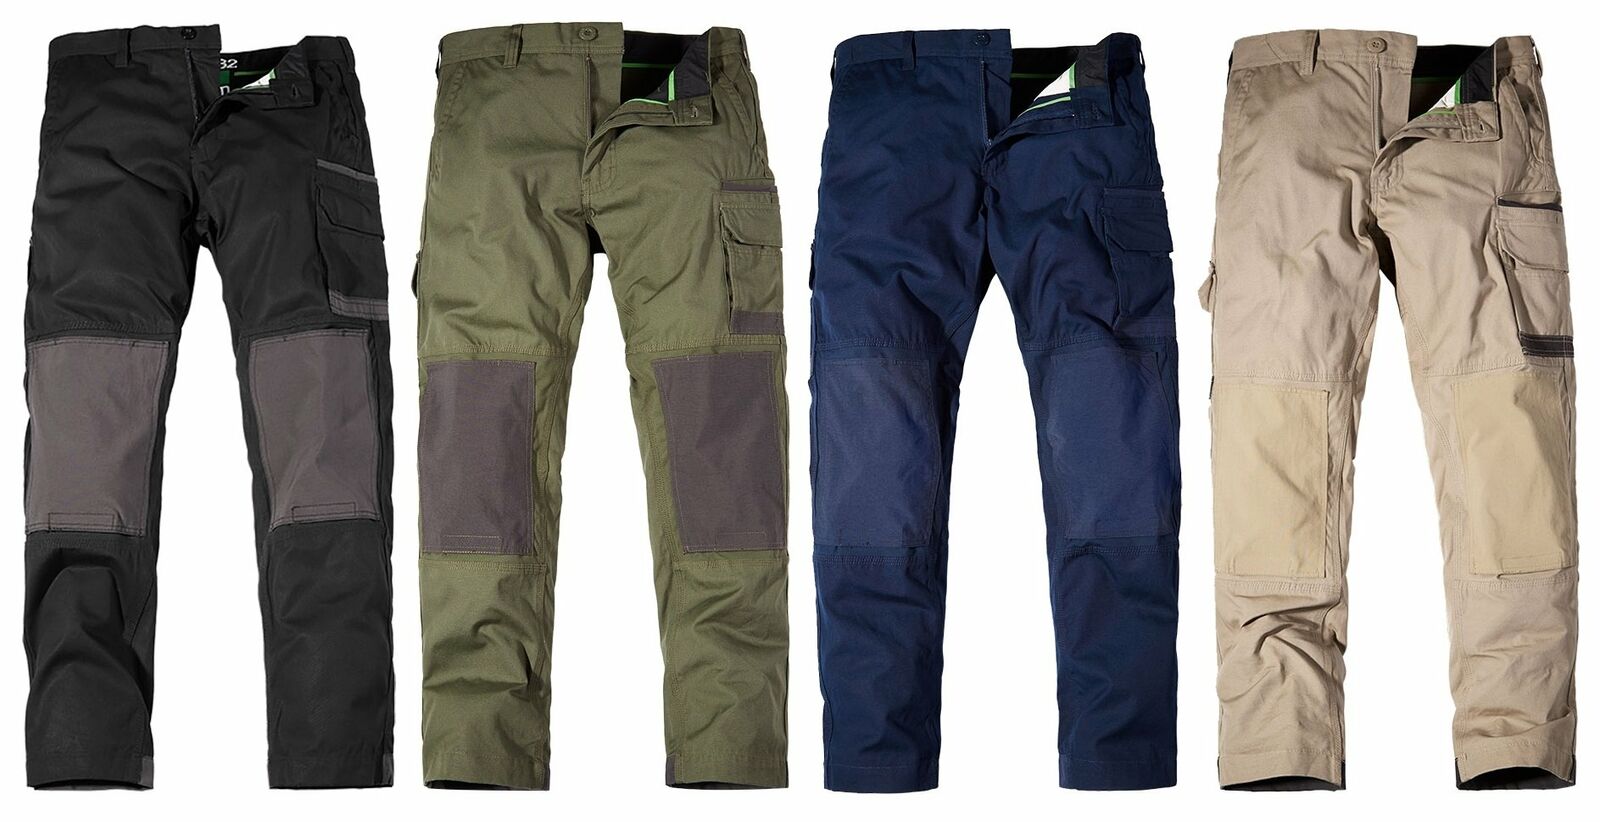 FXD Pants - What is the difference?